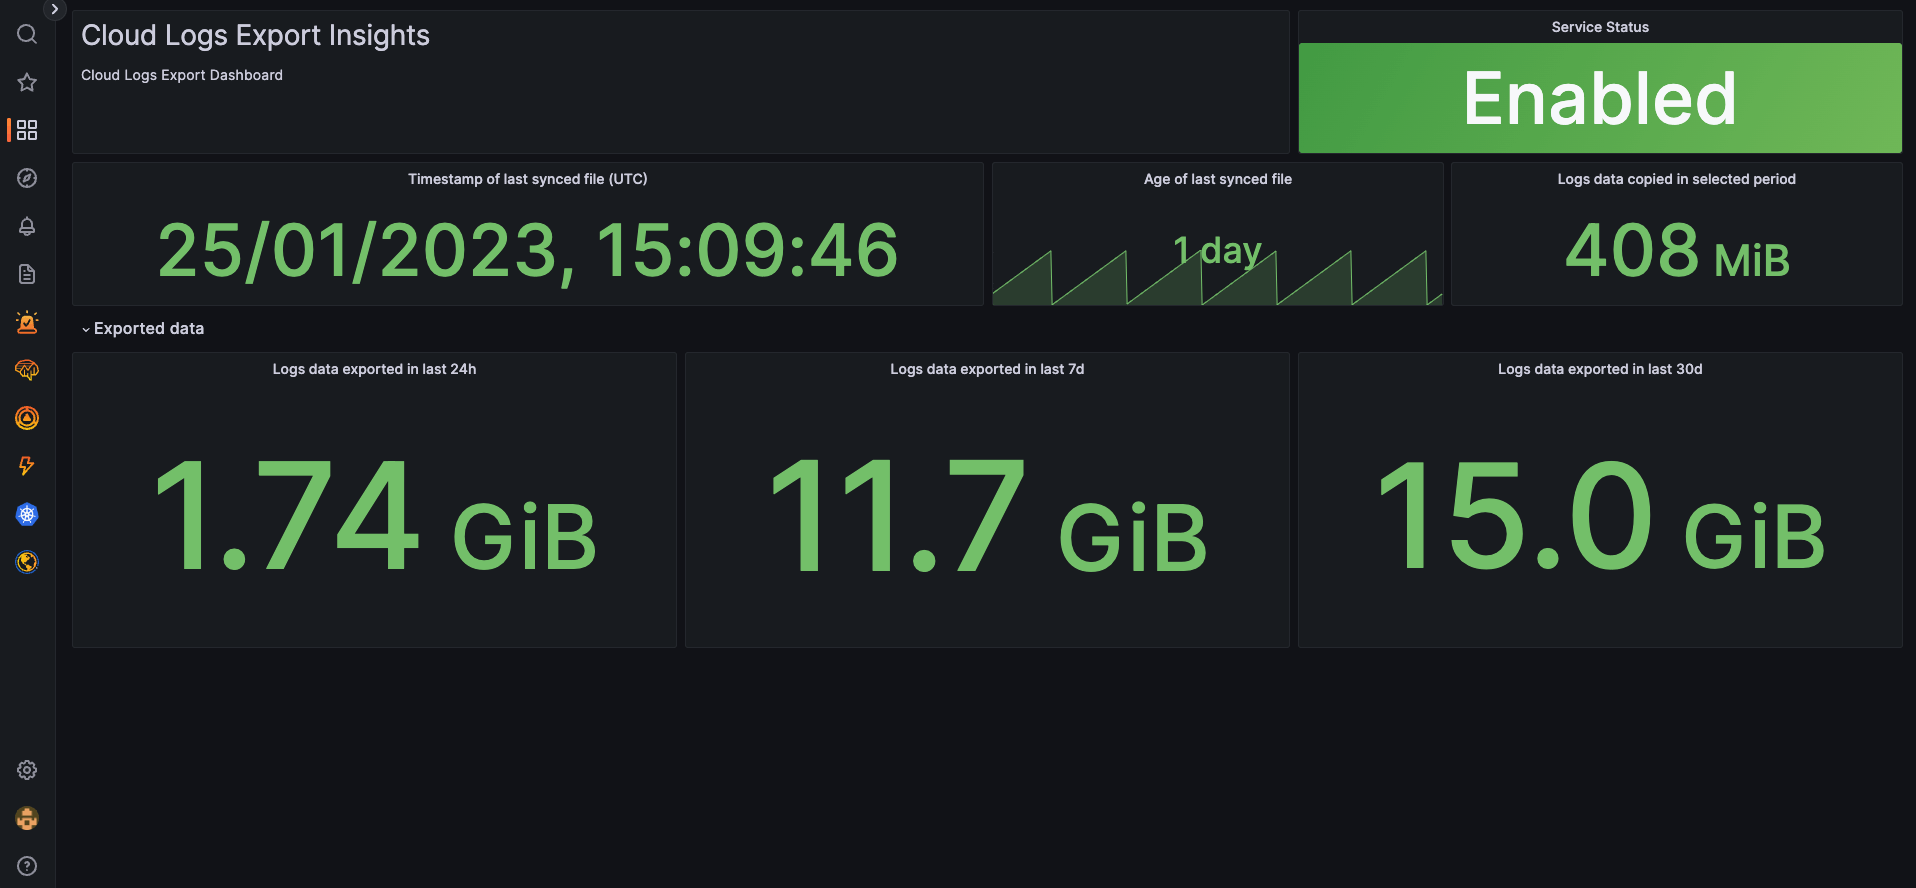 A Grafana dashboard displays insightgs from Grafana Cloud Logs Export, including a timestamp of the last sync, age of the last synced file, logs data copied, and log data exported over different intervals.